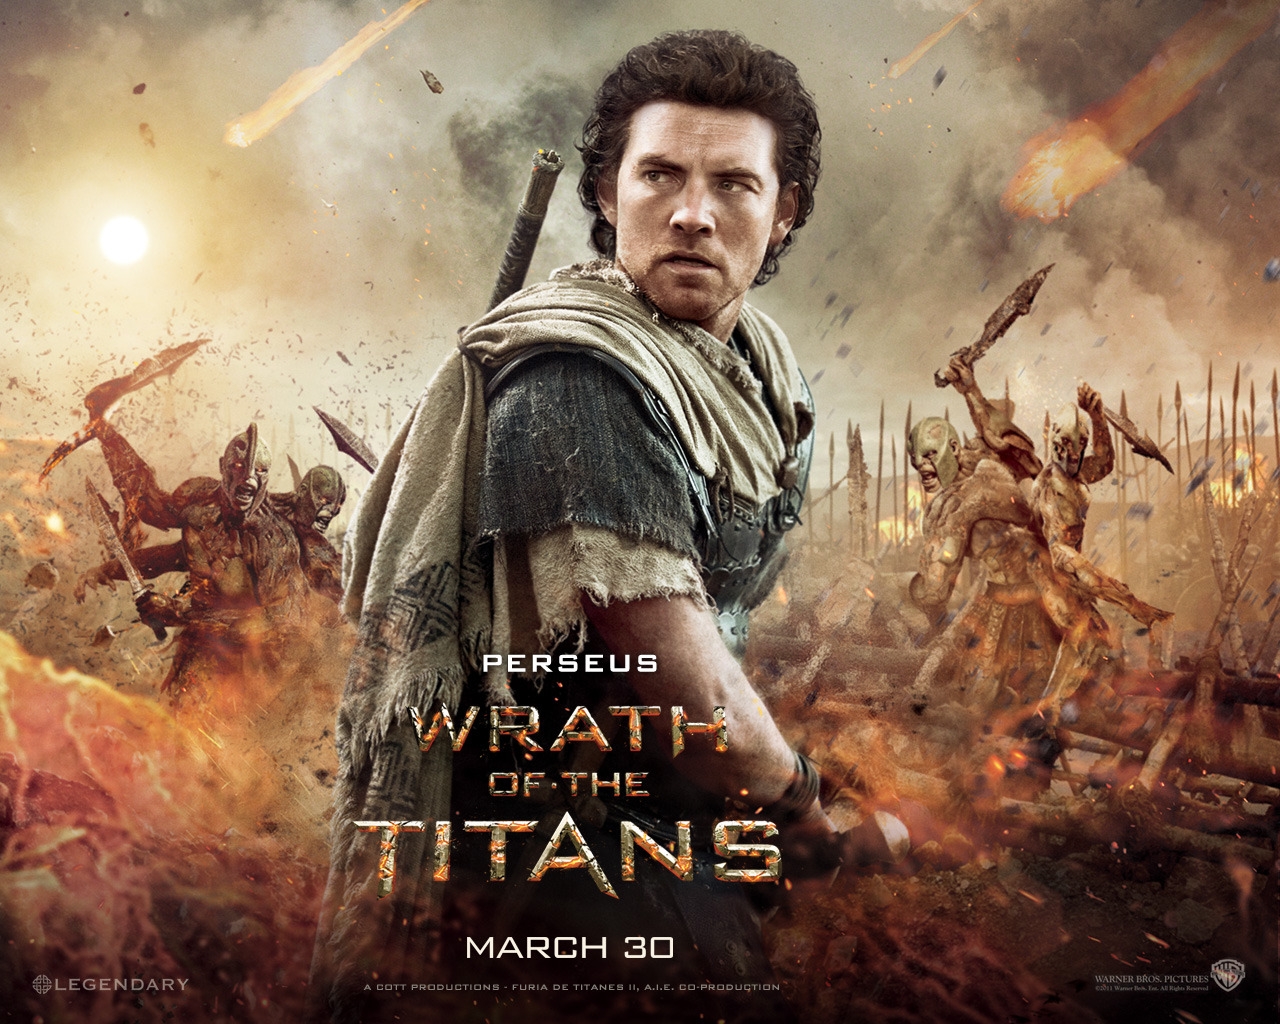 Perseus Wrath of the Titans for 1280 x 1024 resolution